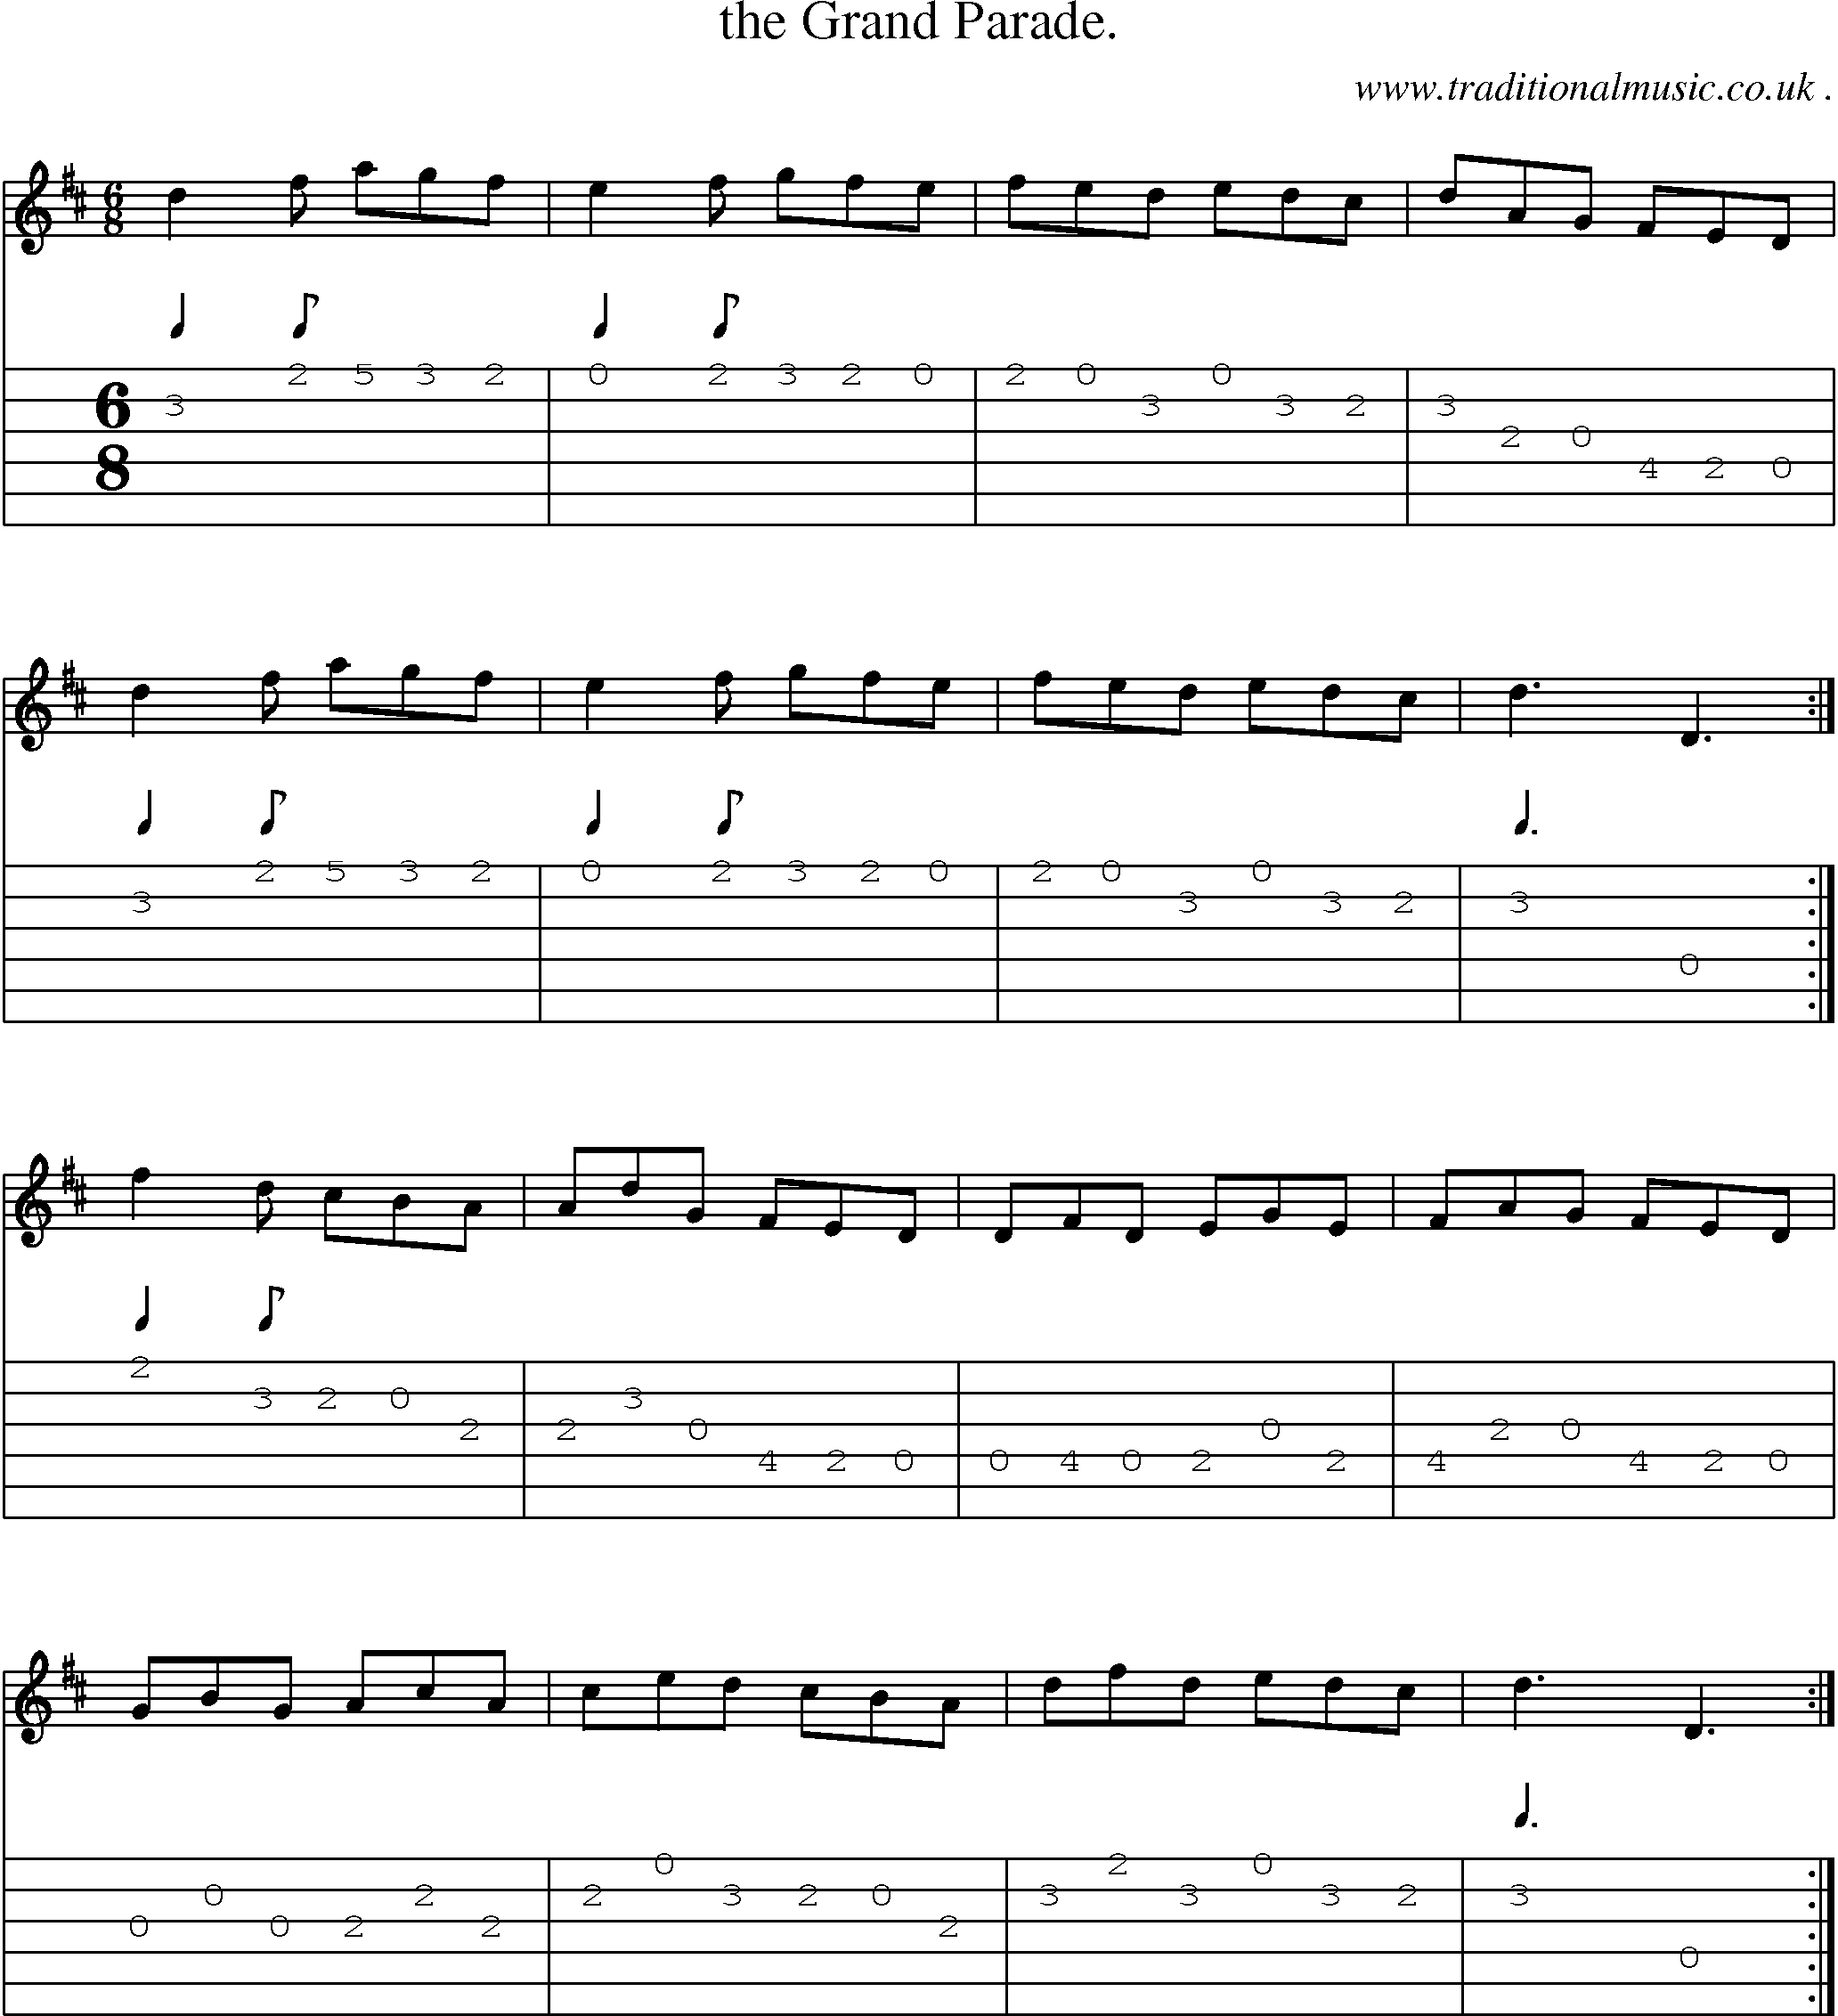 Sheet-Music and Guitar Tabs for The Grand Parade